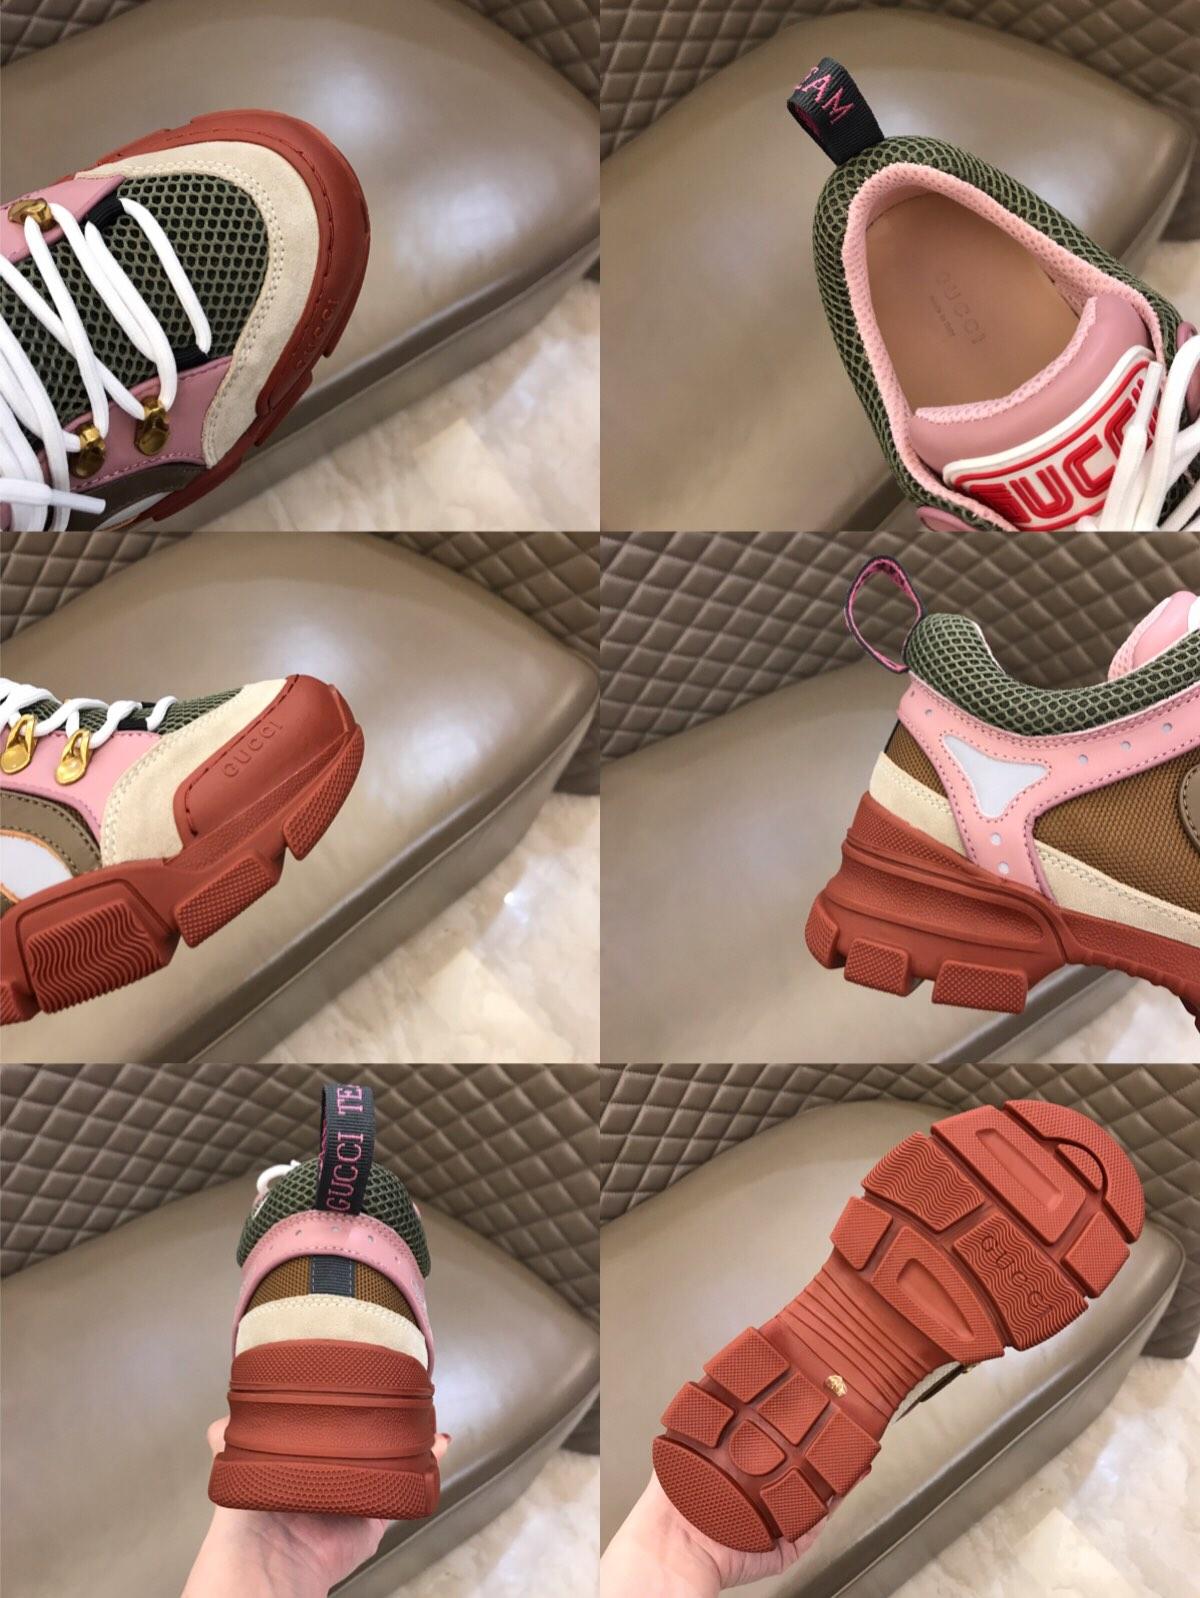 Gucci Perfect Quality Sneakers Pink and white suede with burgundy soles MS02706